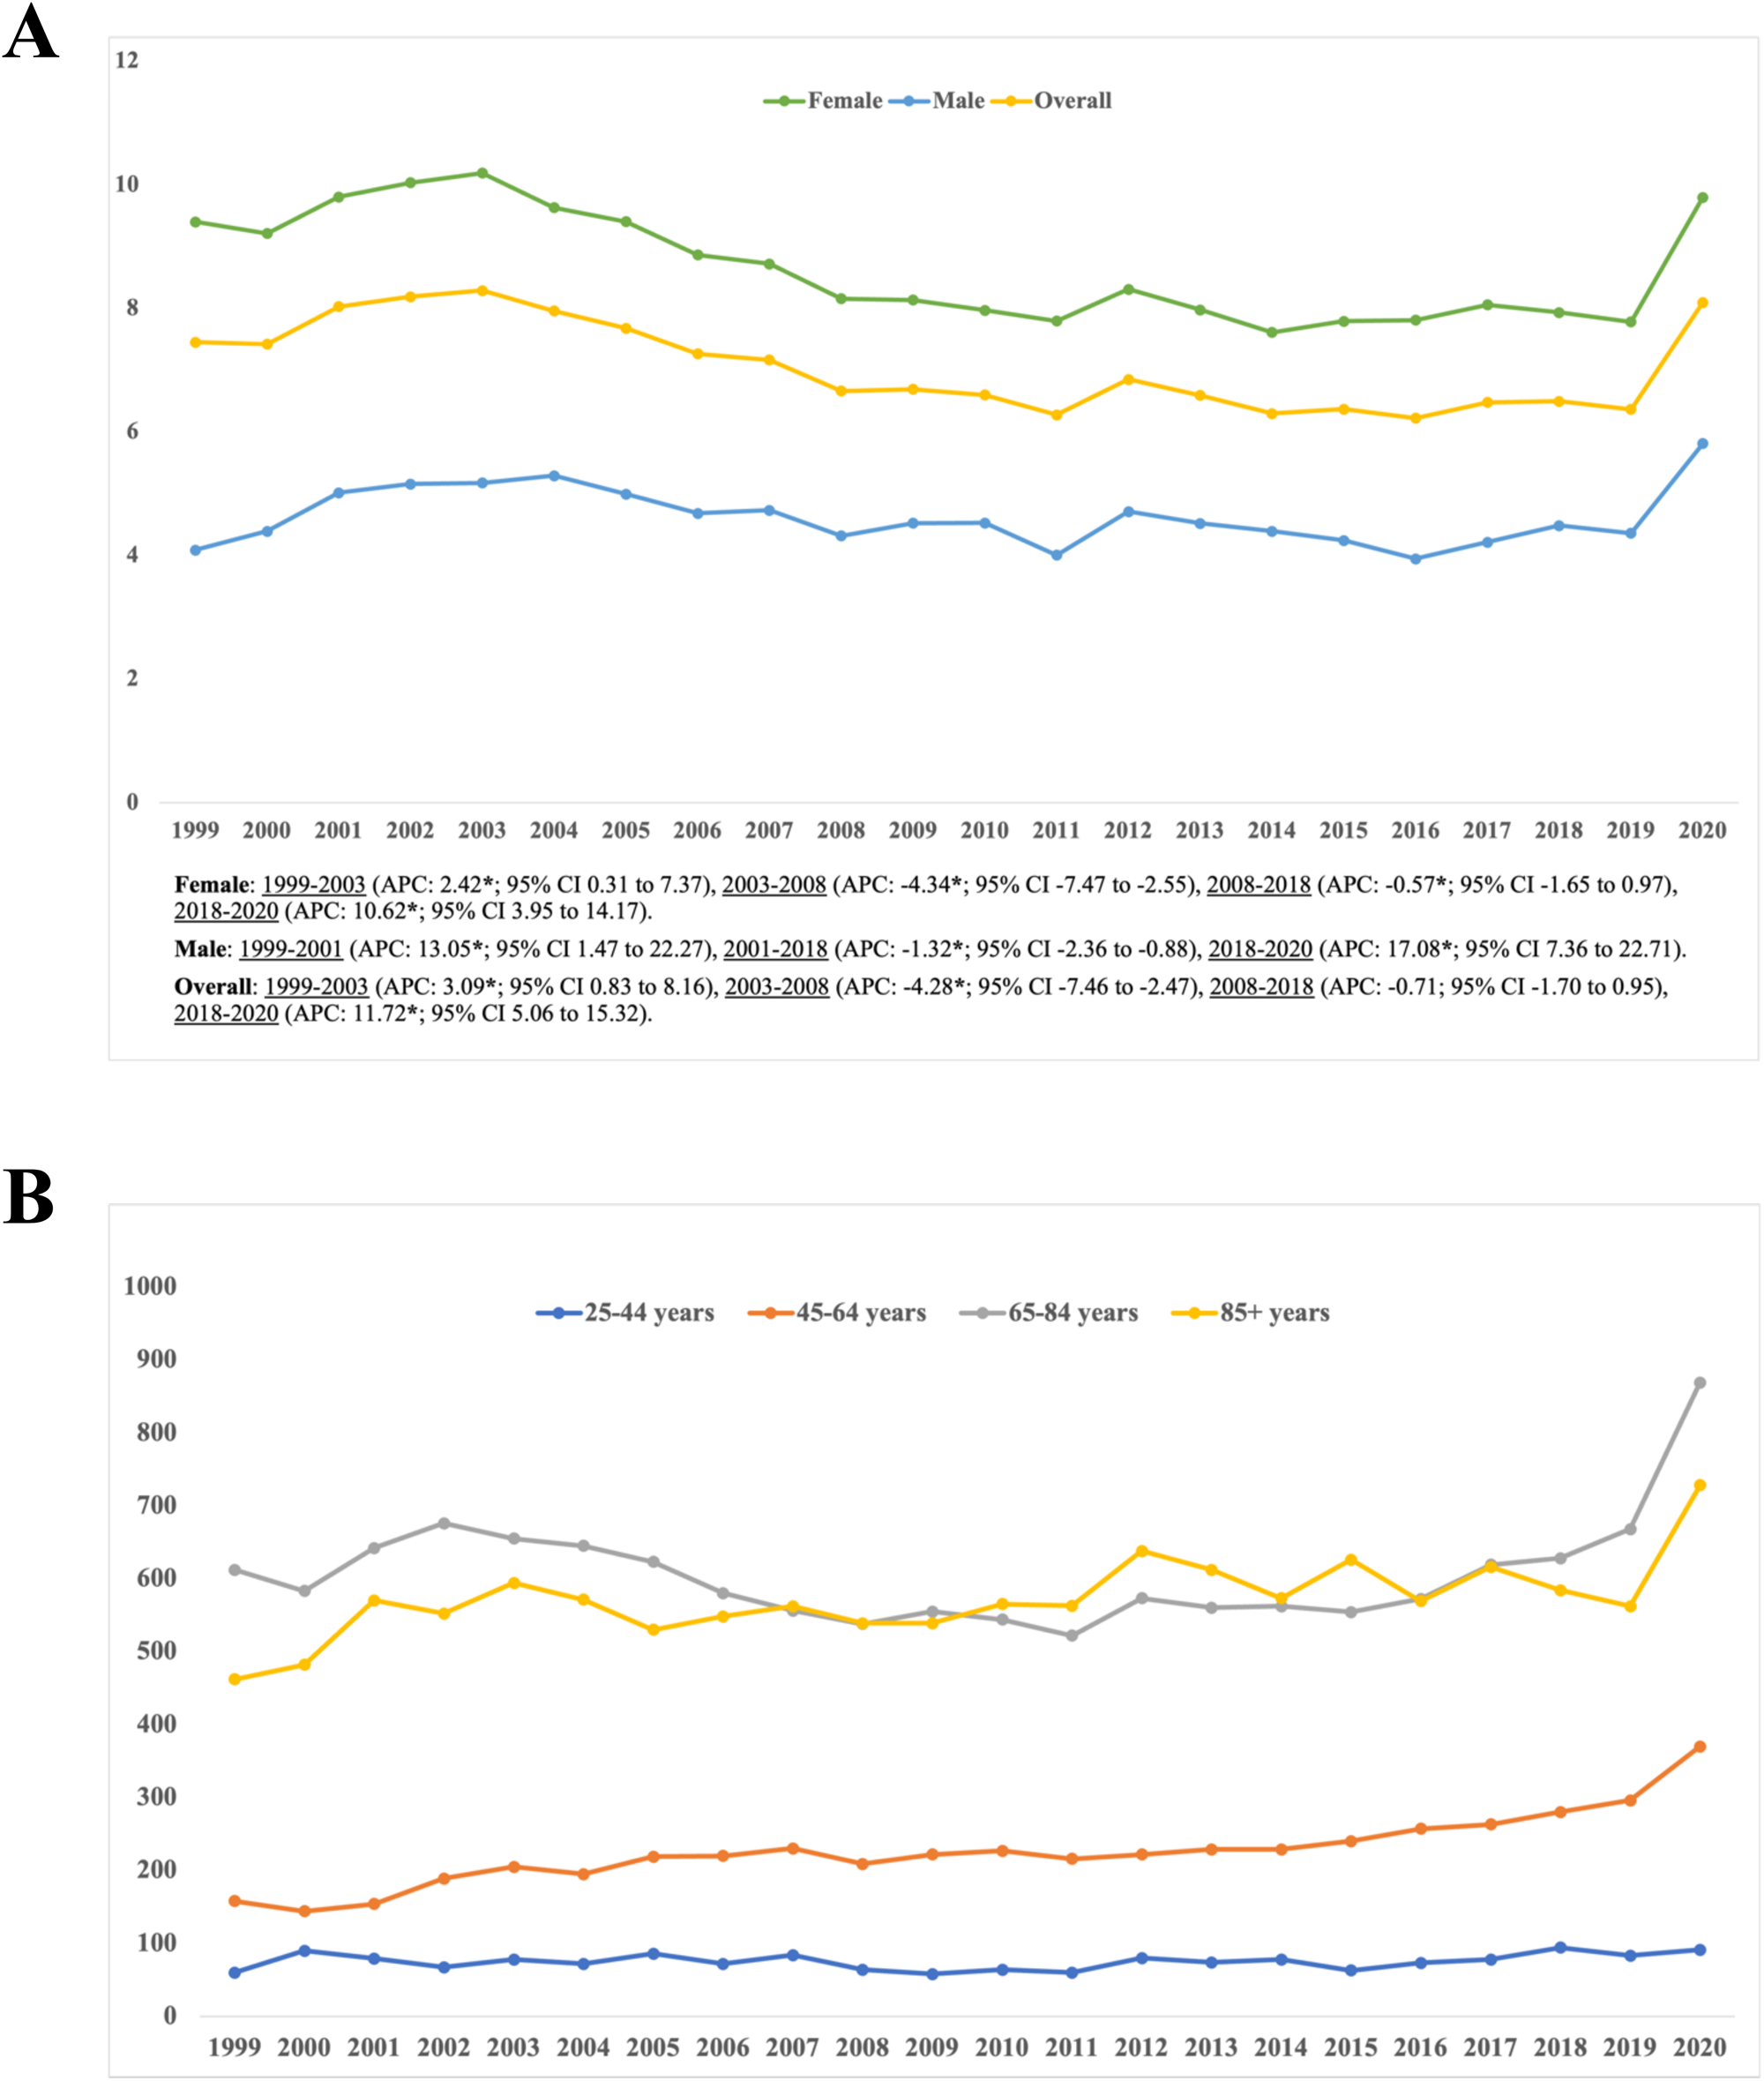 Trends in thyrotoxicosis-related mortality in the United States from 1999 to 2020